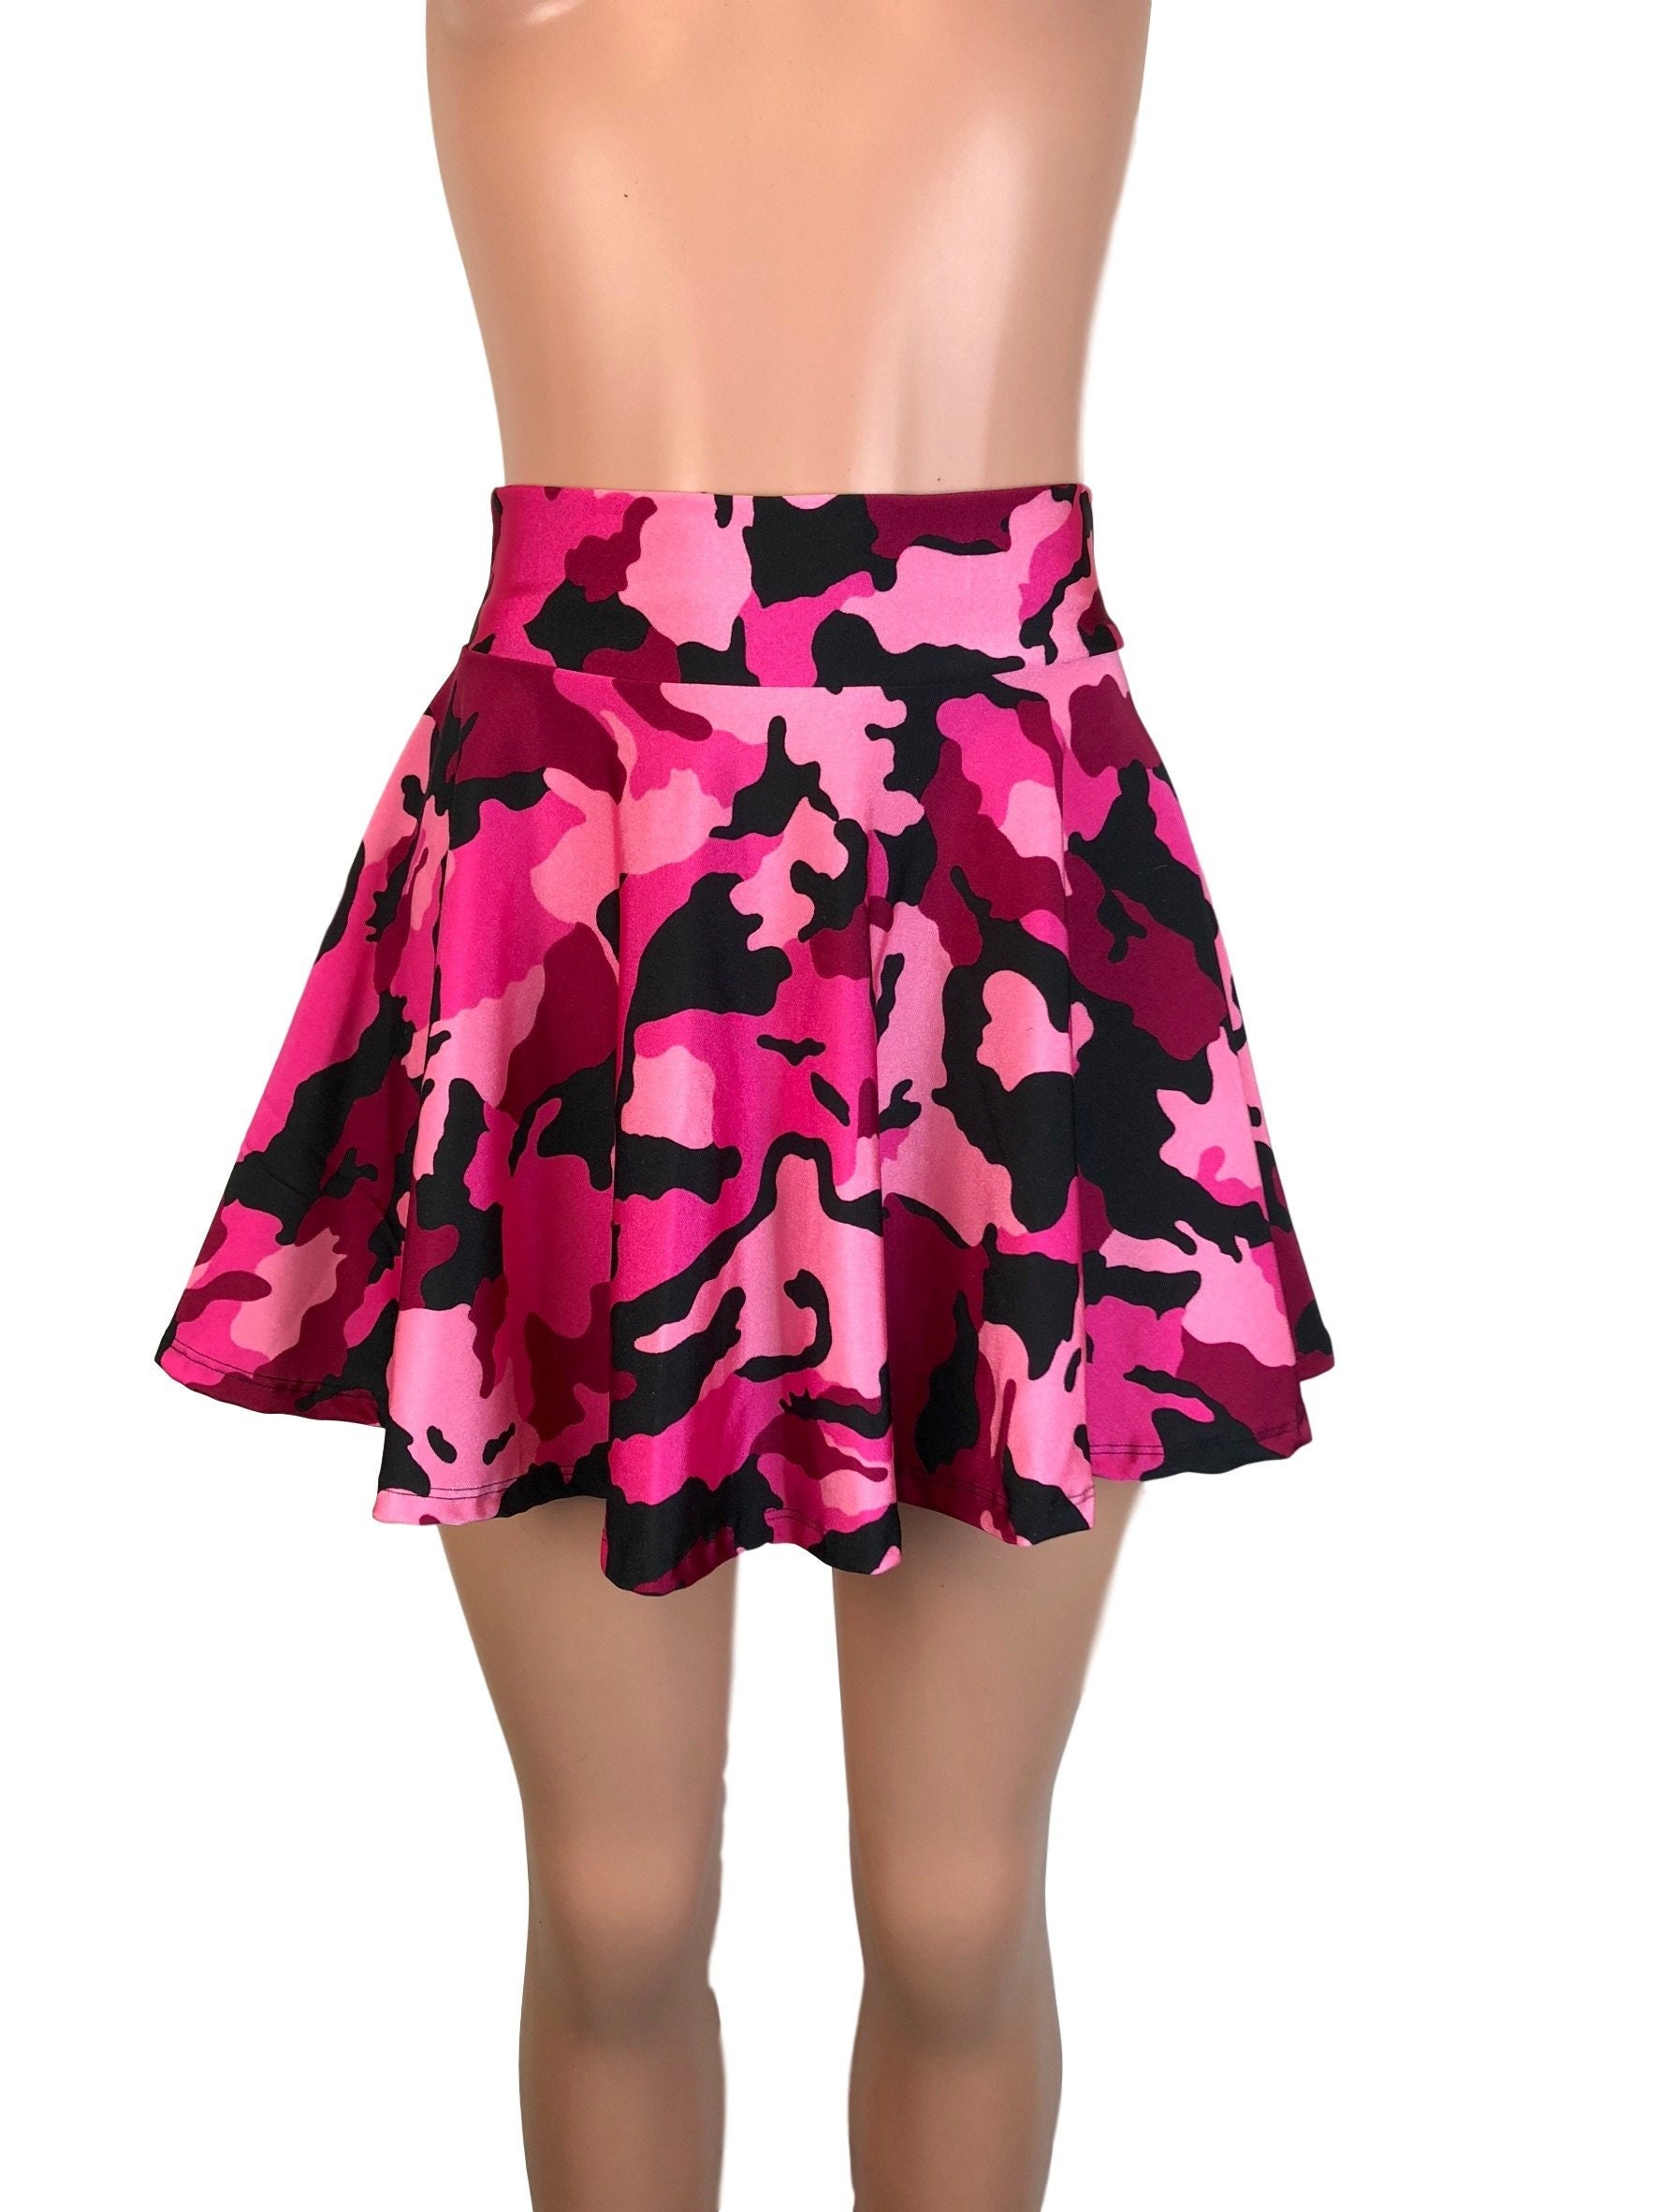 Pink Camouflage Camo High Waisted Skater Skirt Clubwear | Etsy